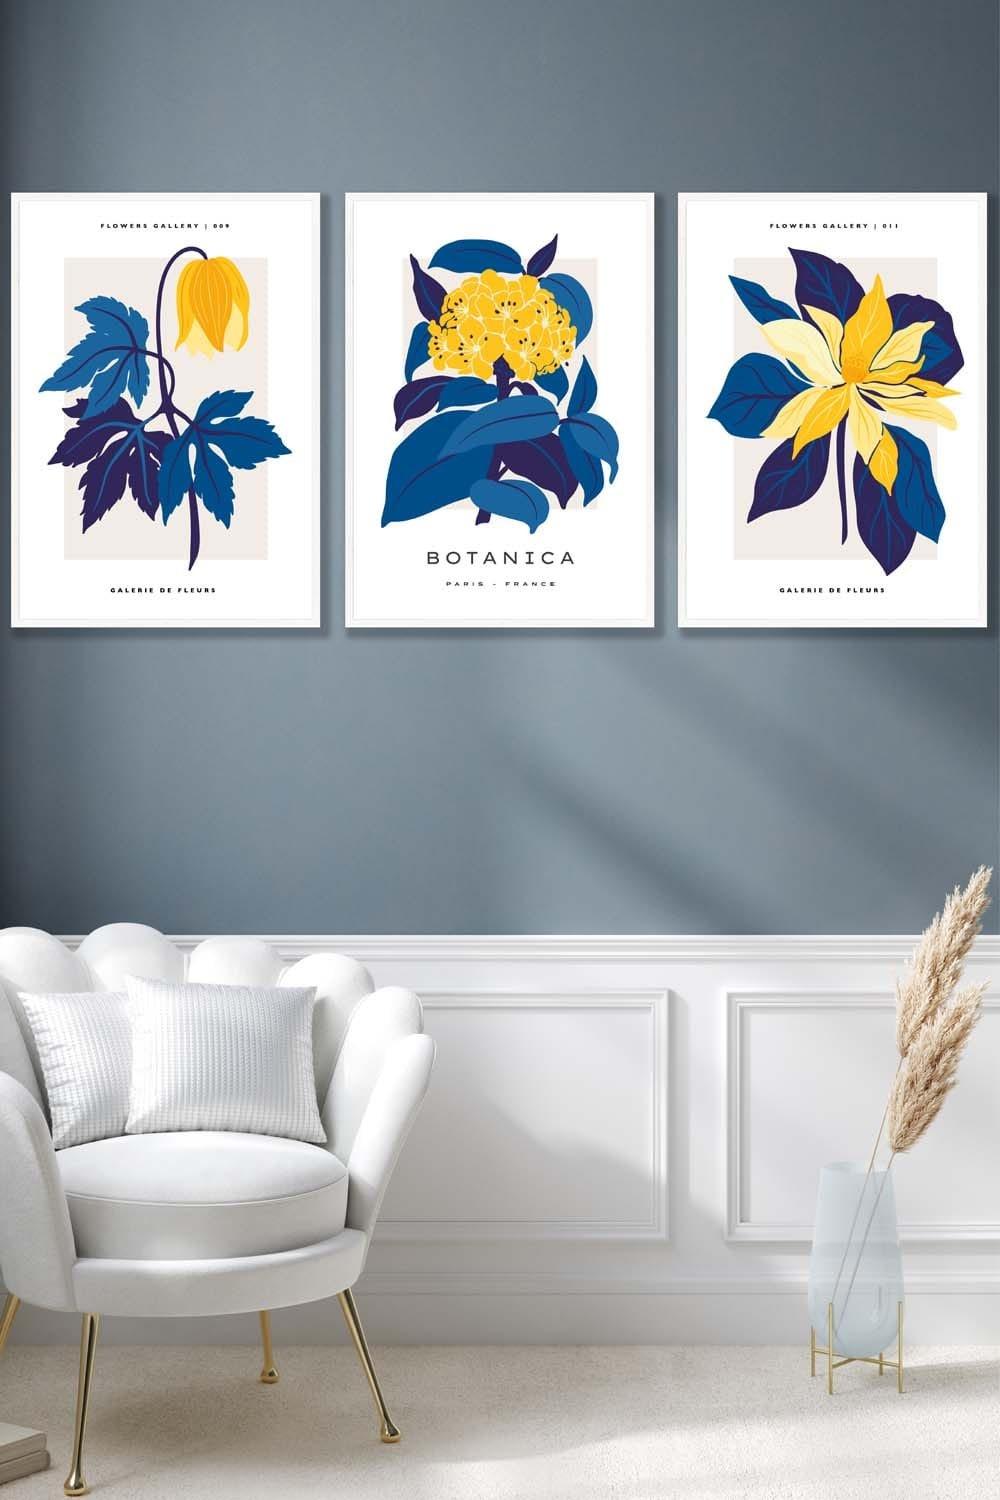 Set of 3 White Framed Navy Blue and Yellow Flower Market Wall Art